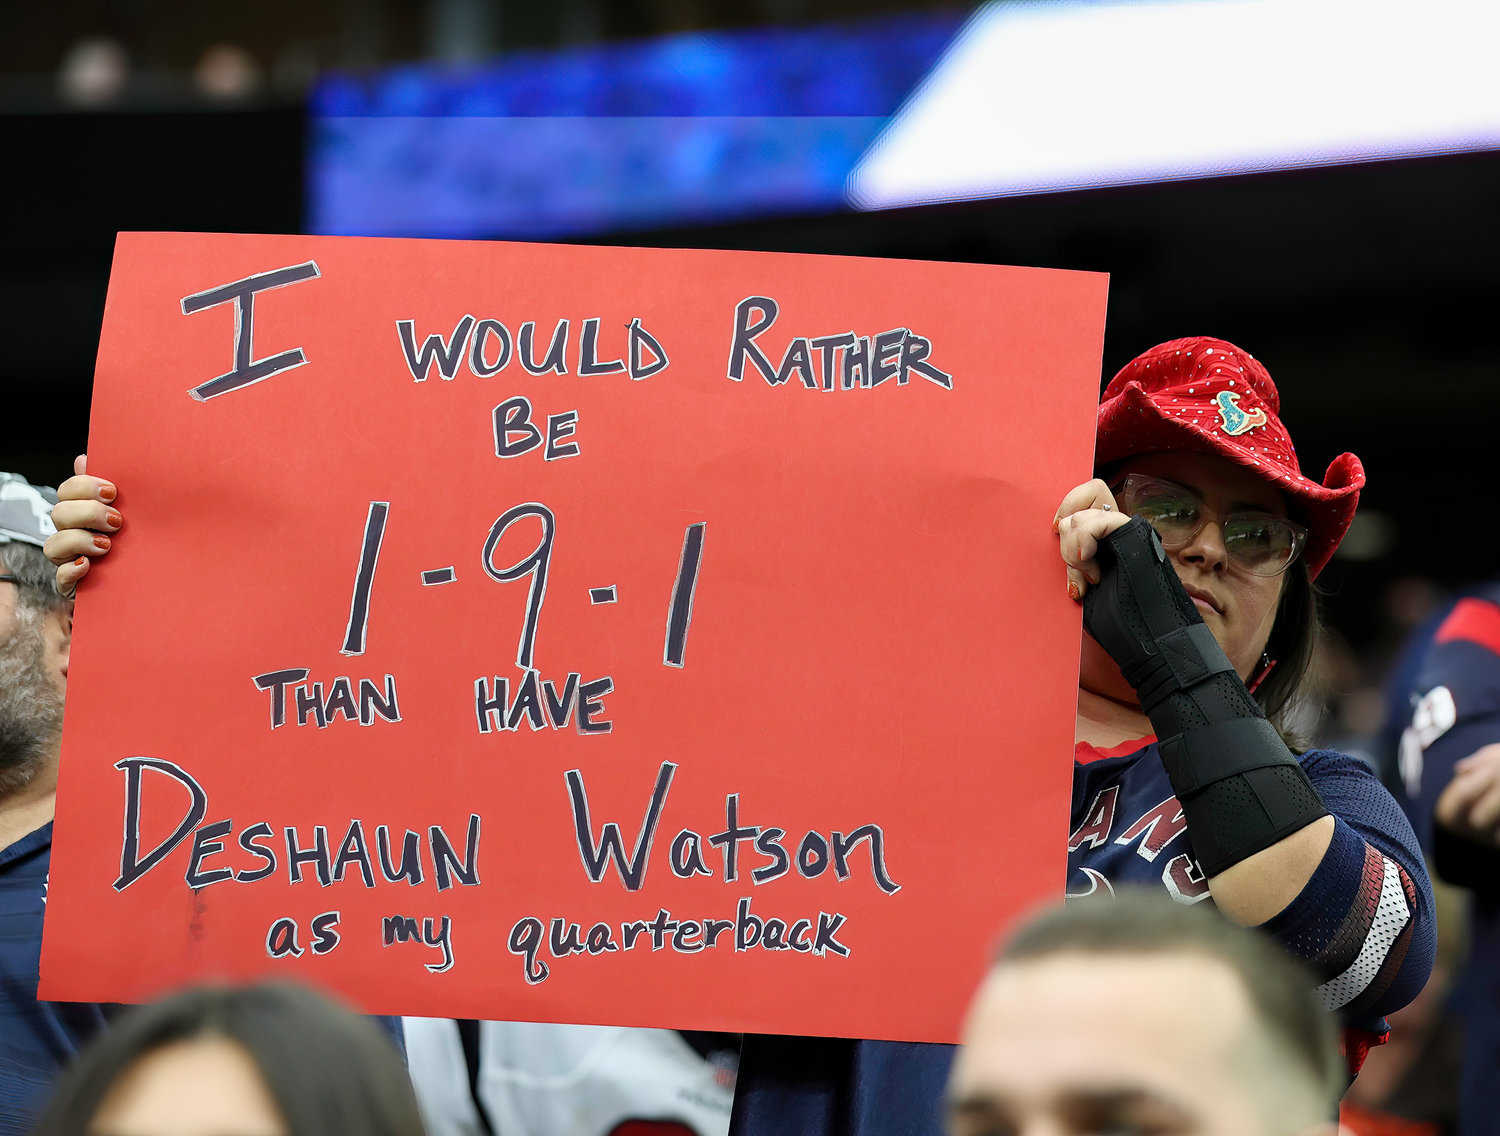 A Houston Texans fan holds up a sign about former Texans and current Cleveland Browns quarterback Deshaun Watson during an NFL game between the Texans and the Browns on Dec. 4, 2022, in Houston. The Browns won, 27-14.